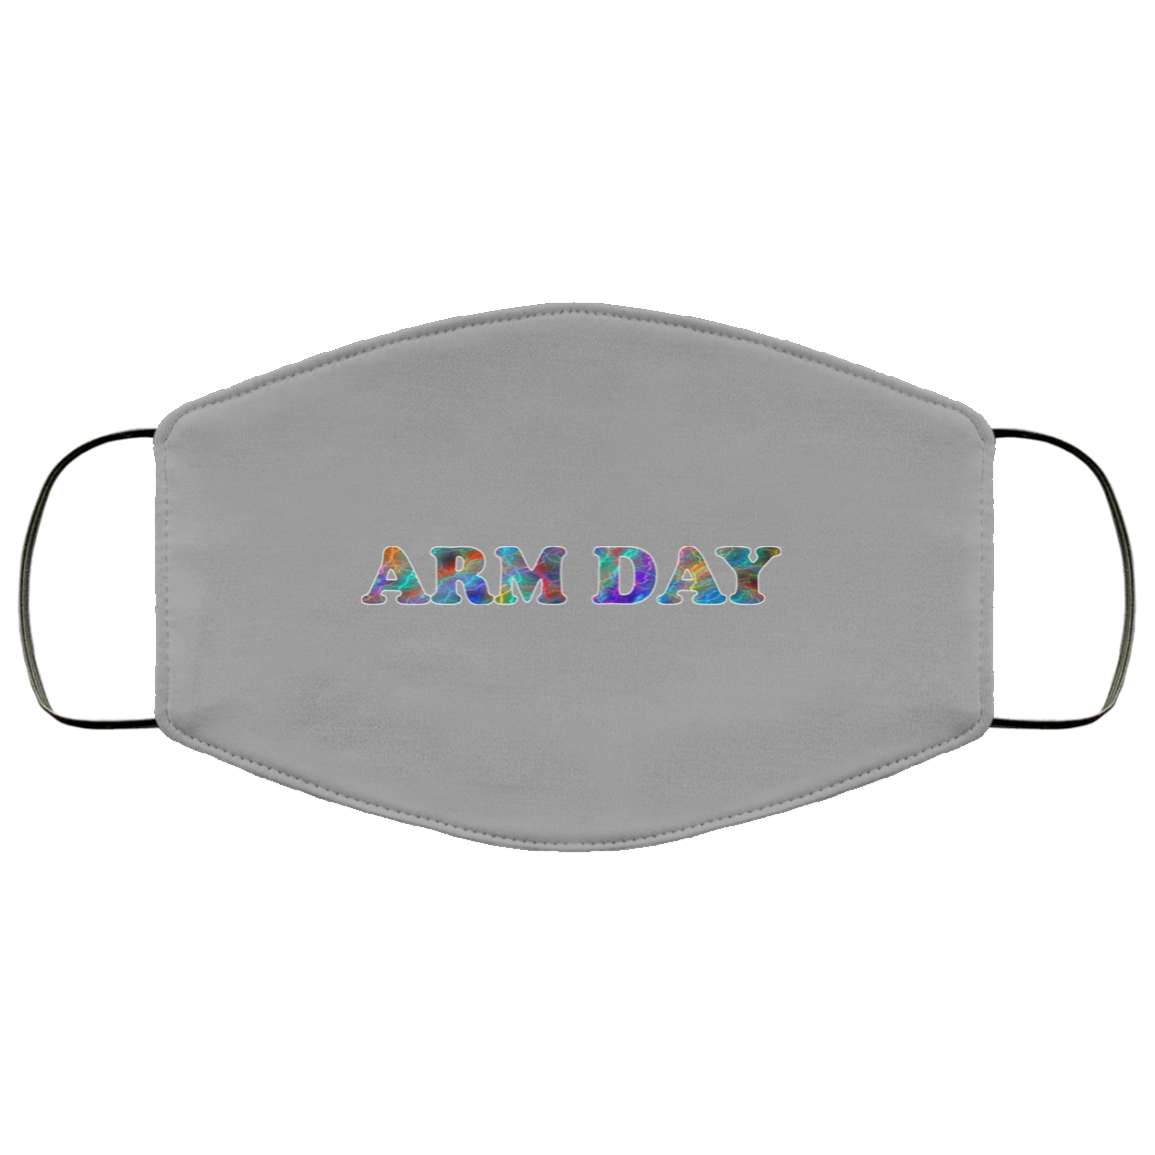 Arm Day 2 Layer Protective Mask